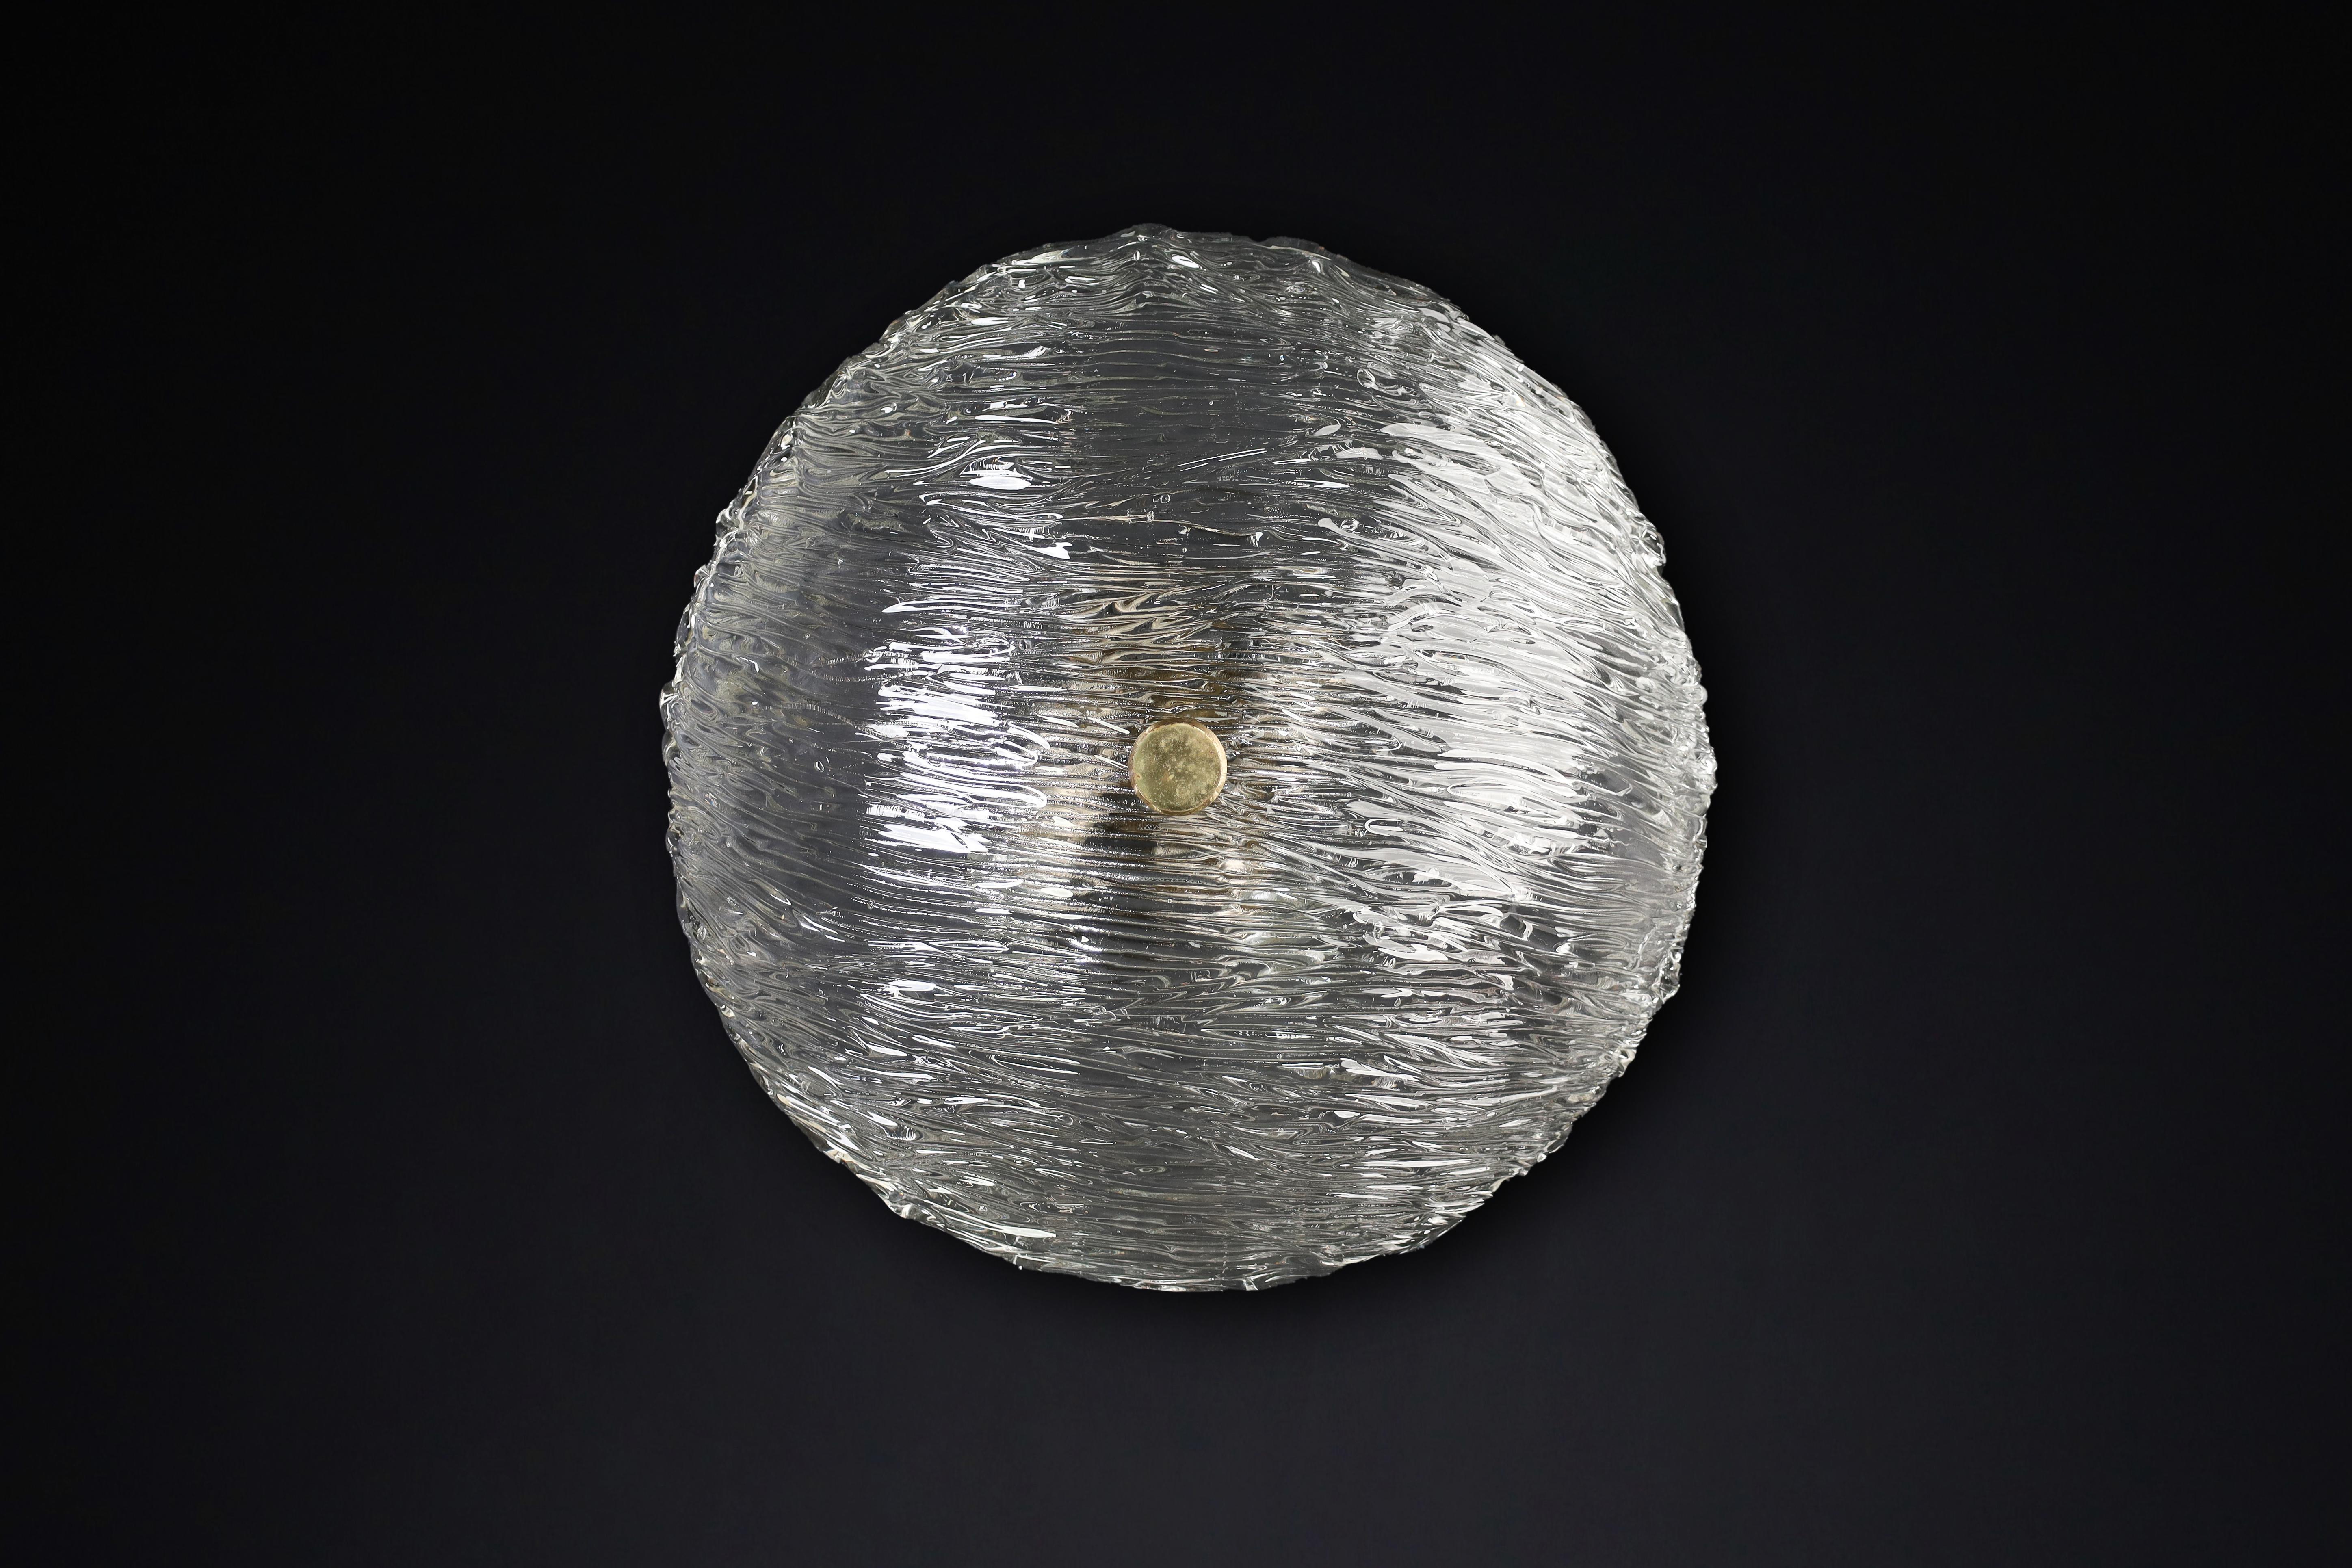 Venini Murano Flush Mount / Wall light from the Bambù series, made in Italy in the 1950s. 

Midcentury Large Venini Murano Flush Mount / Wall light from the Bambù series, made in Italy during the 1950s. The light fixture is made of thick-textured